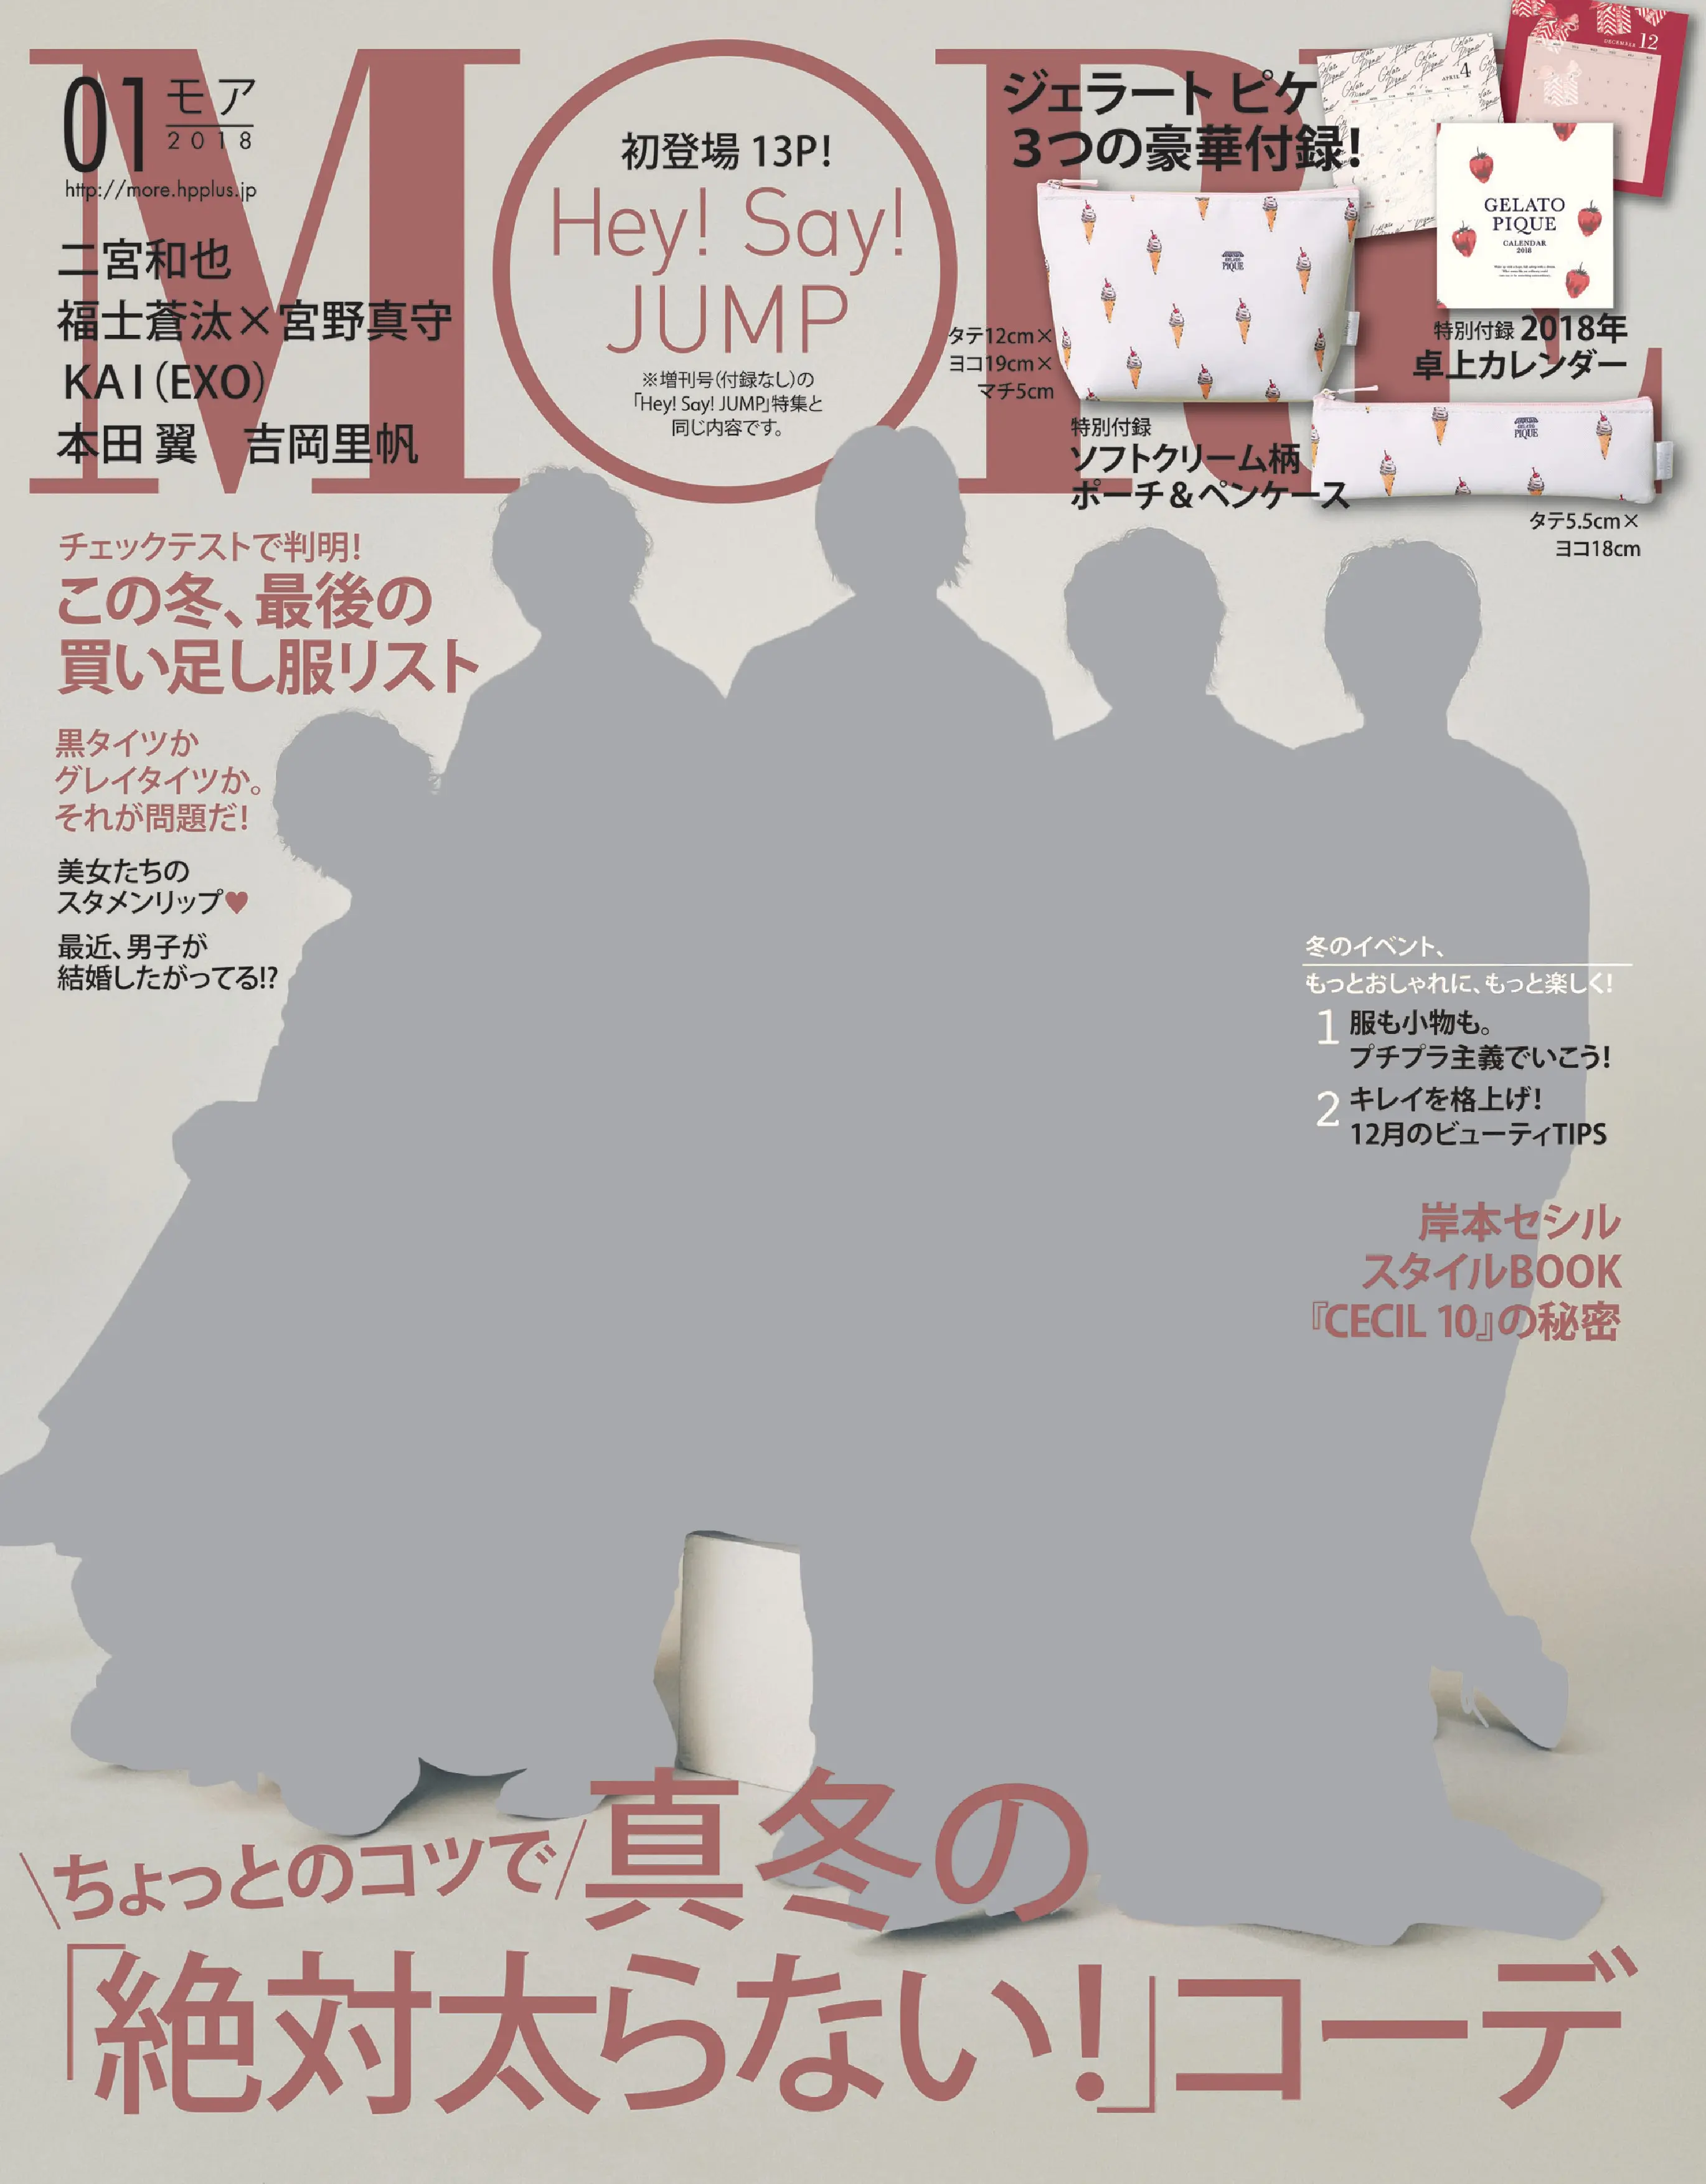 More1月号 雑誌 More 試し読み Daily More